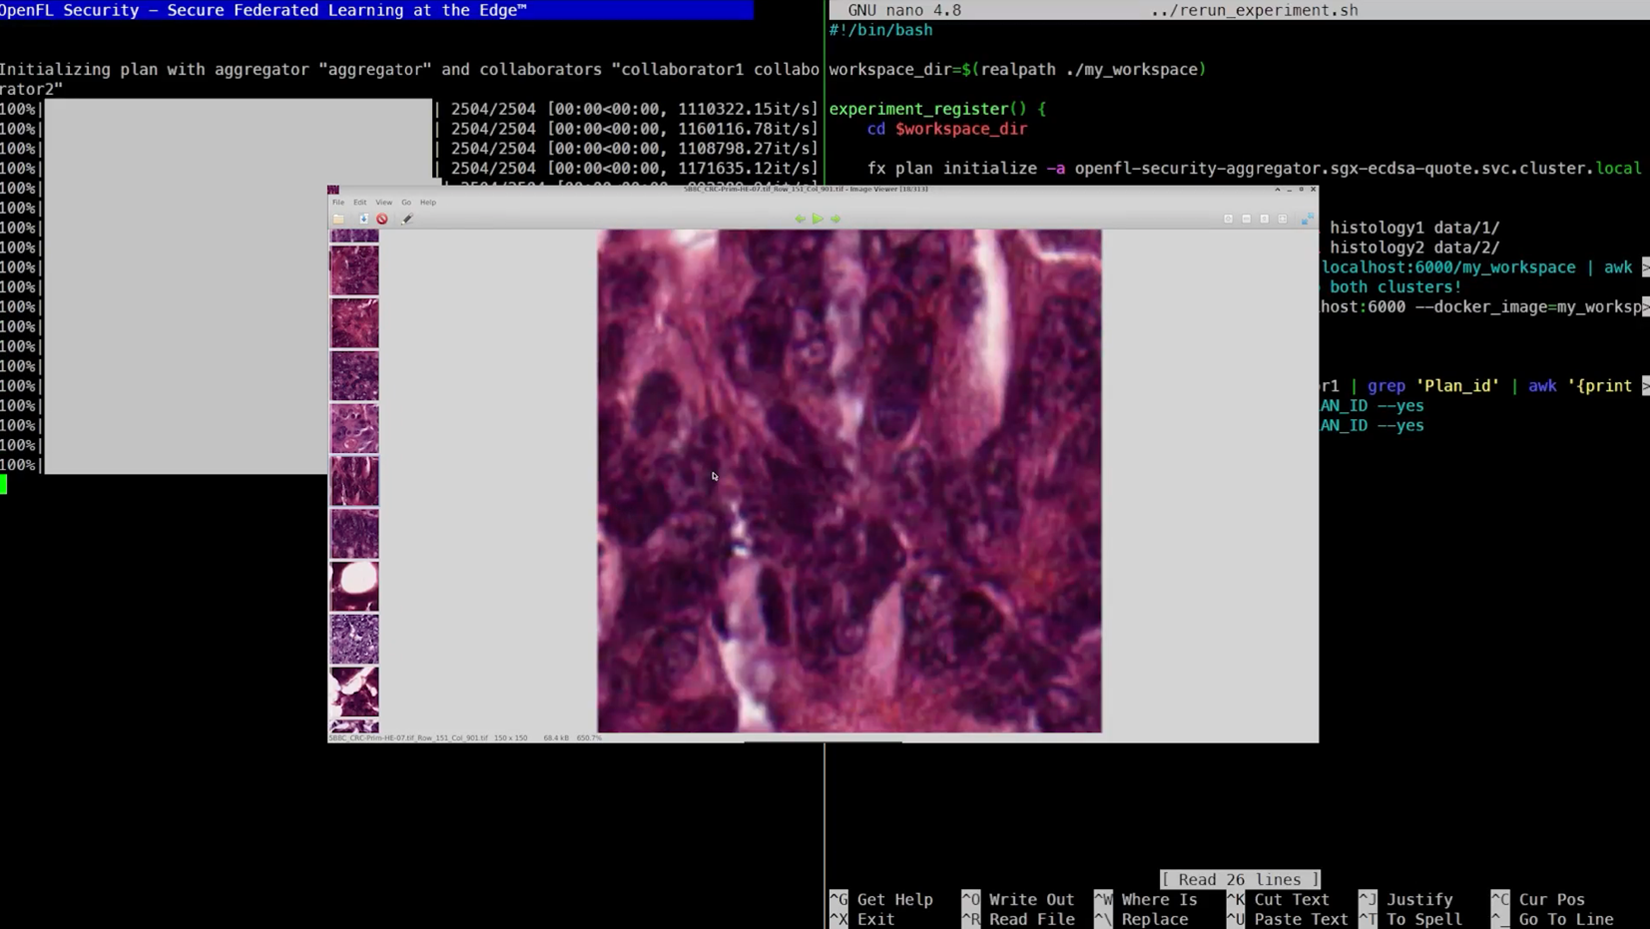 A training terminal shows strings of code as OpenFL processes datasets from different organizations. An image of a brain scan is on the screen.